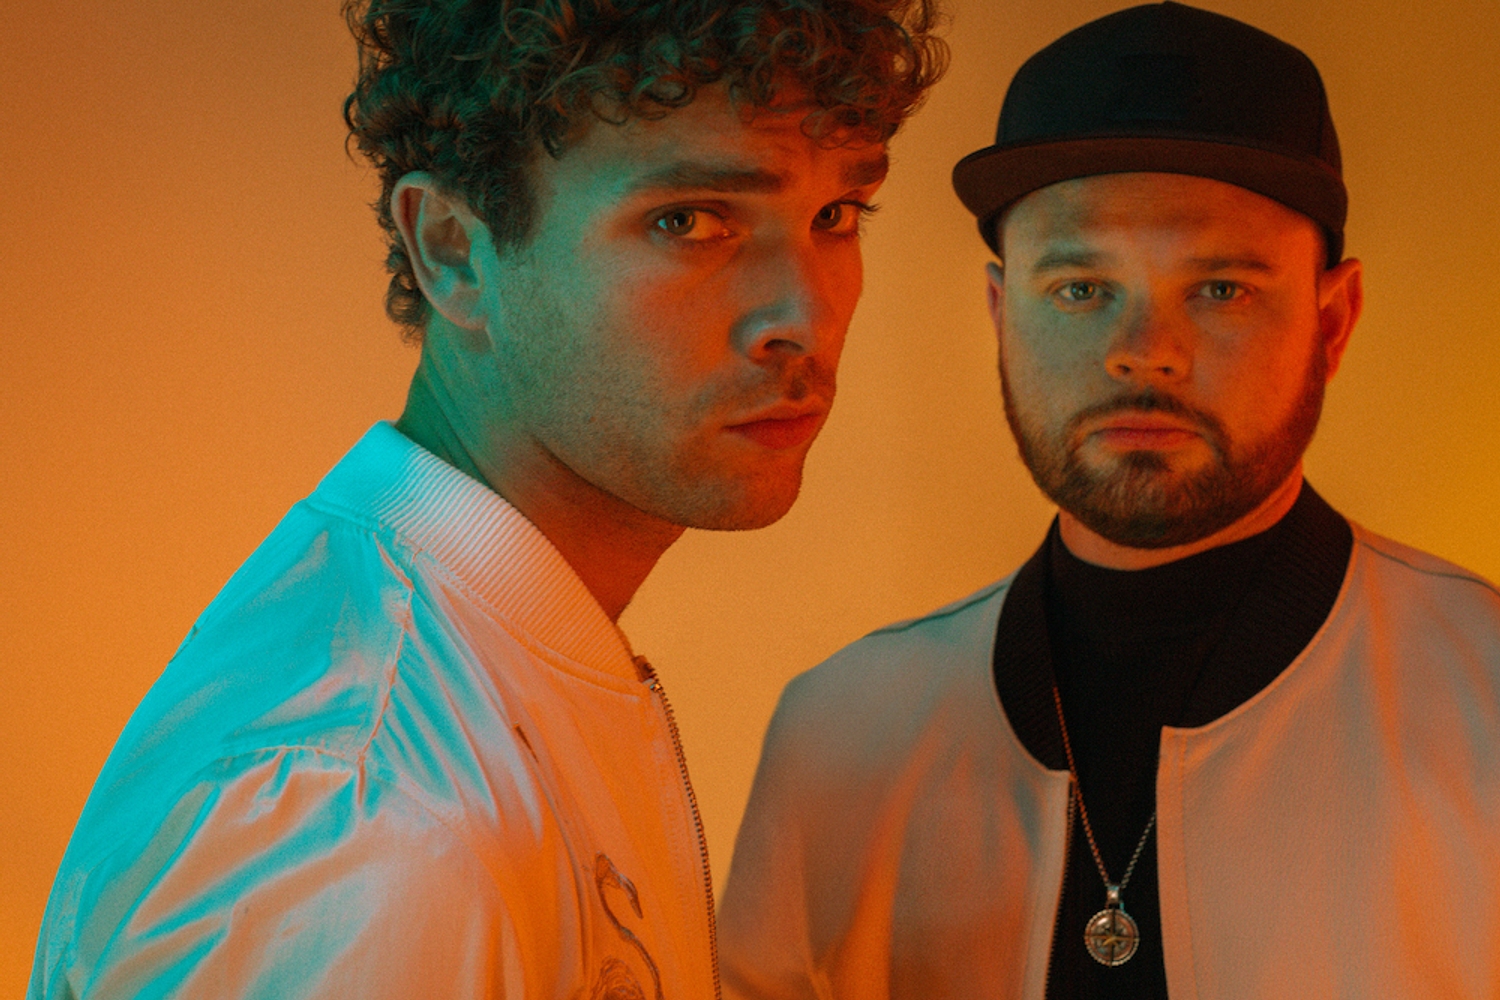 Royal Blood unleash new track 'Trouble's Coming'